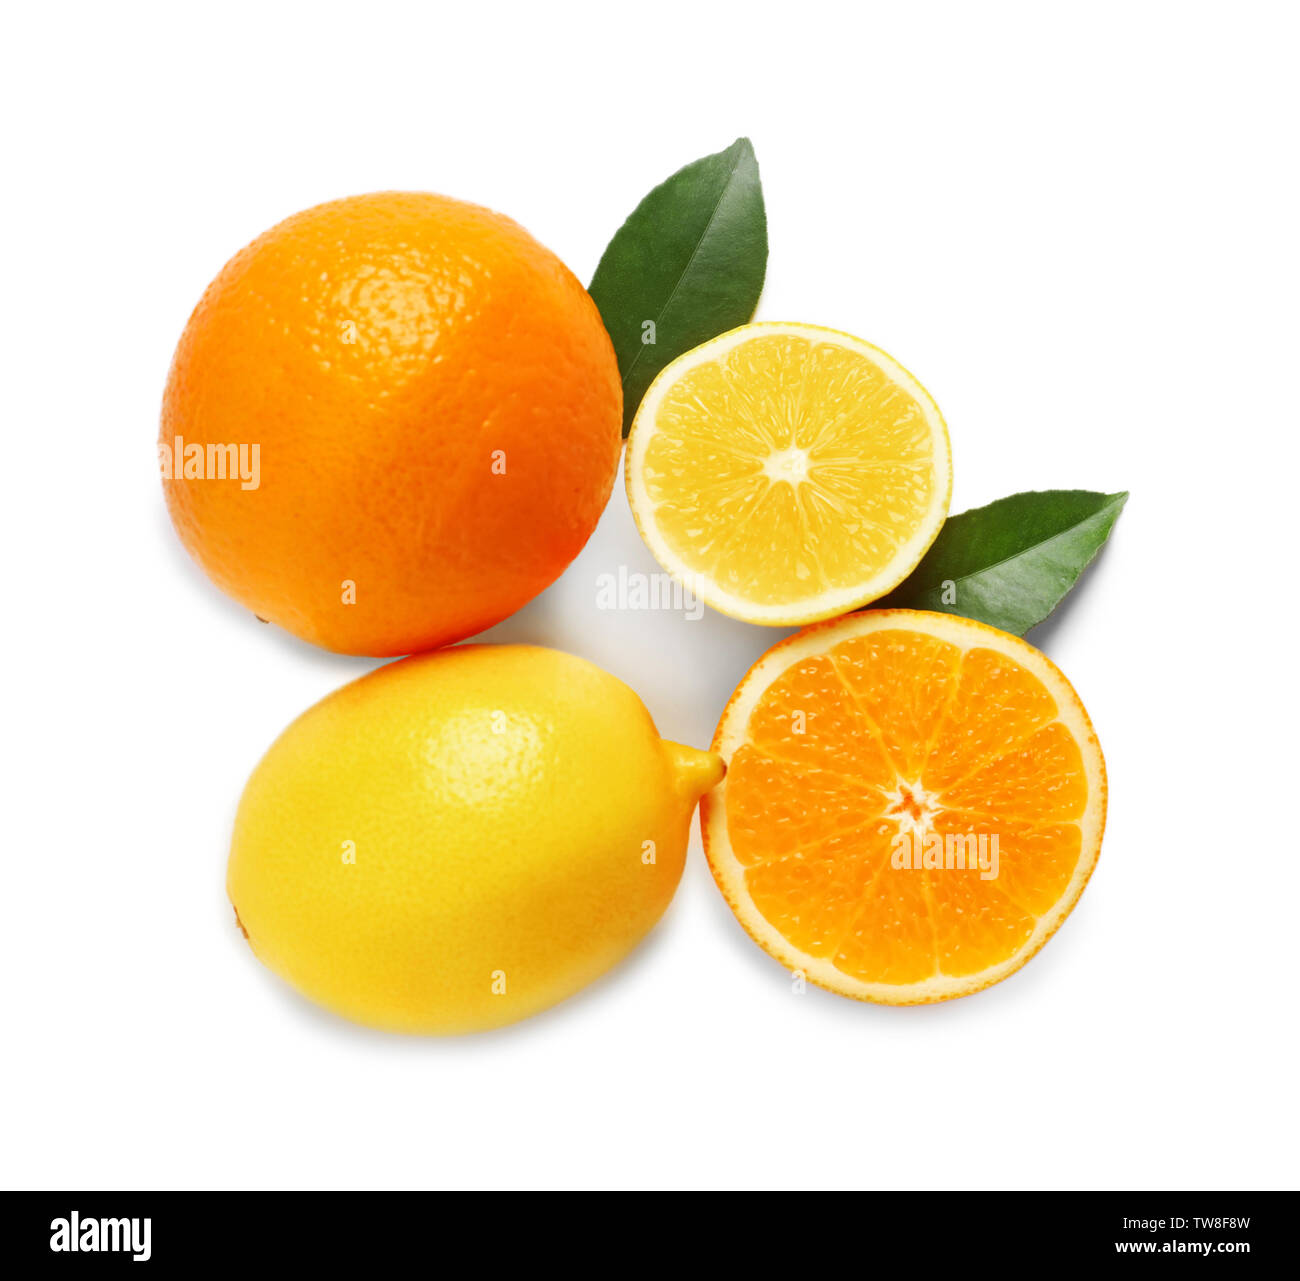 Composition with ripe lemons and oranges on white background Stock Photo